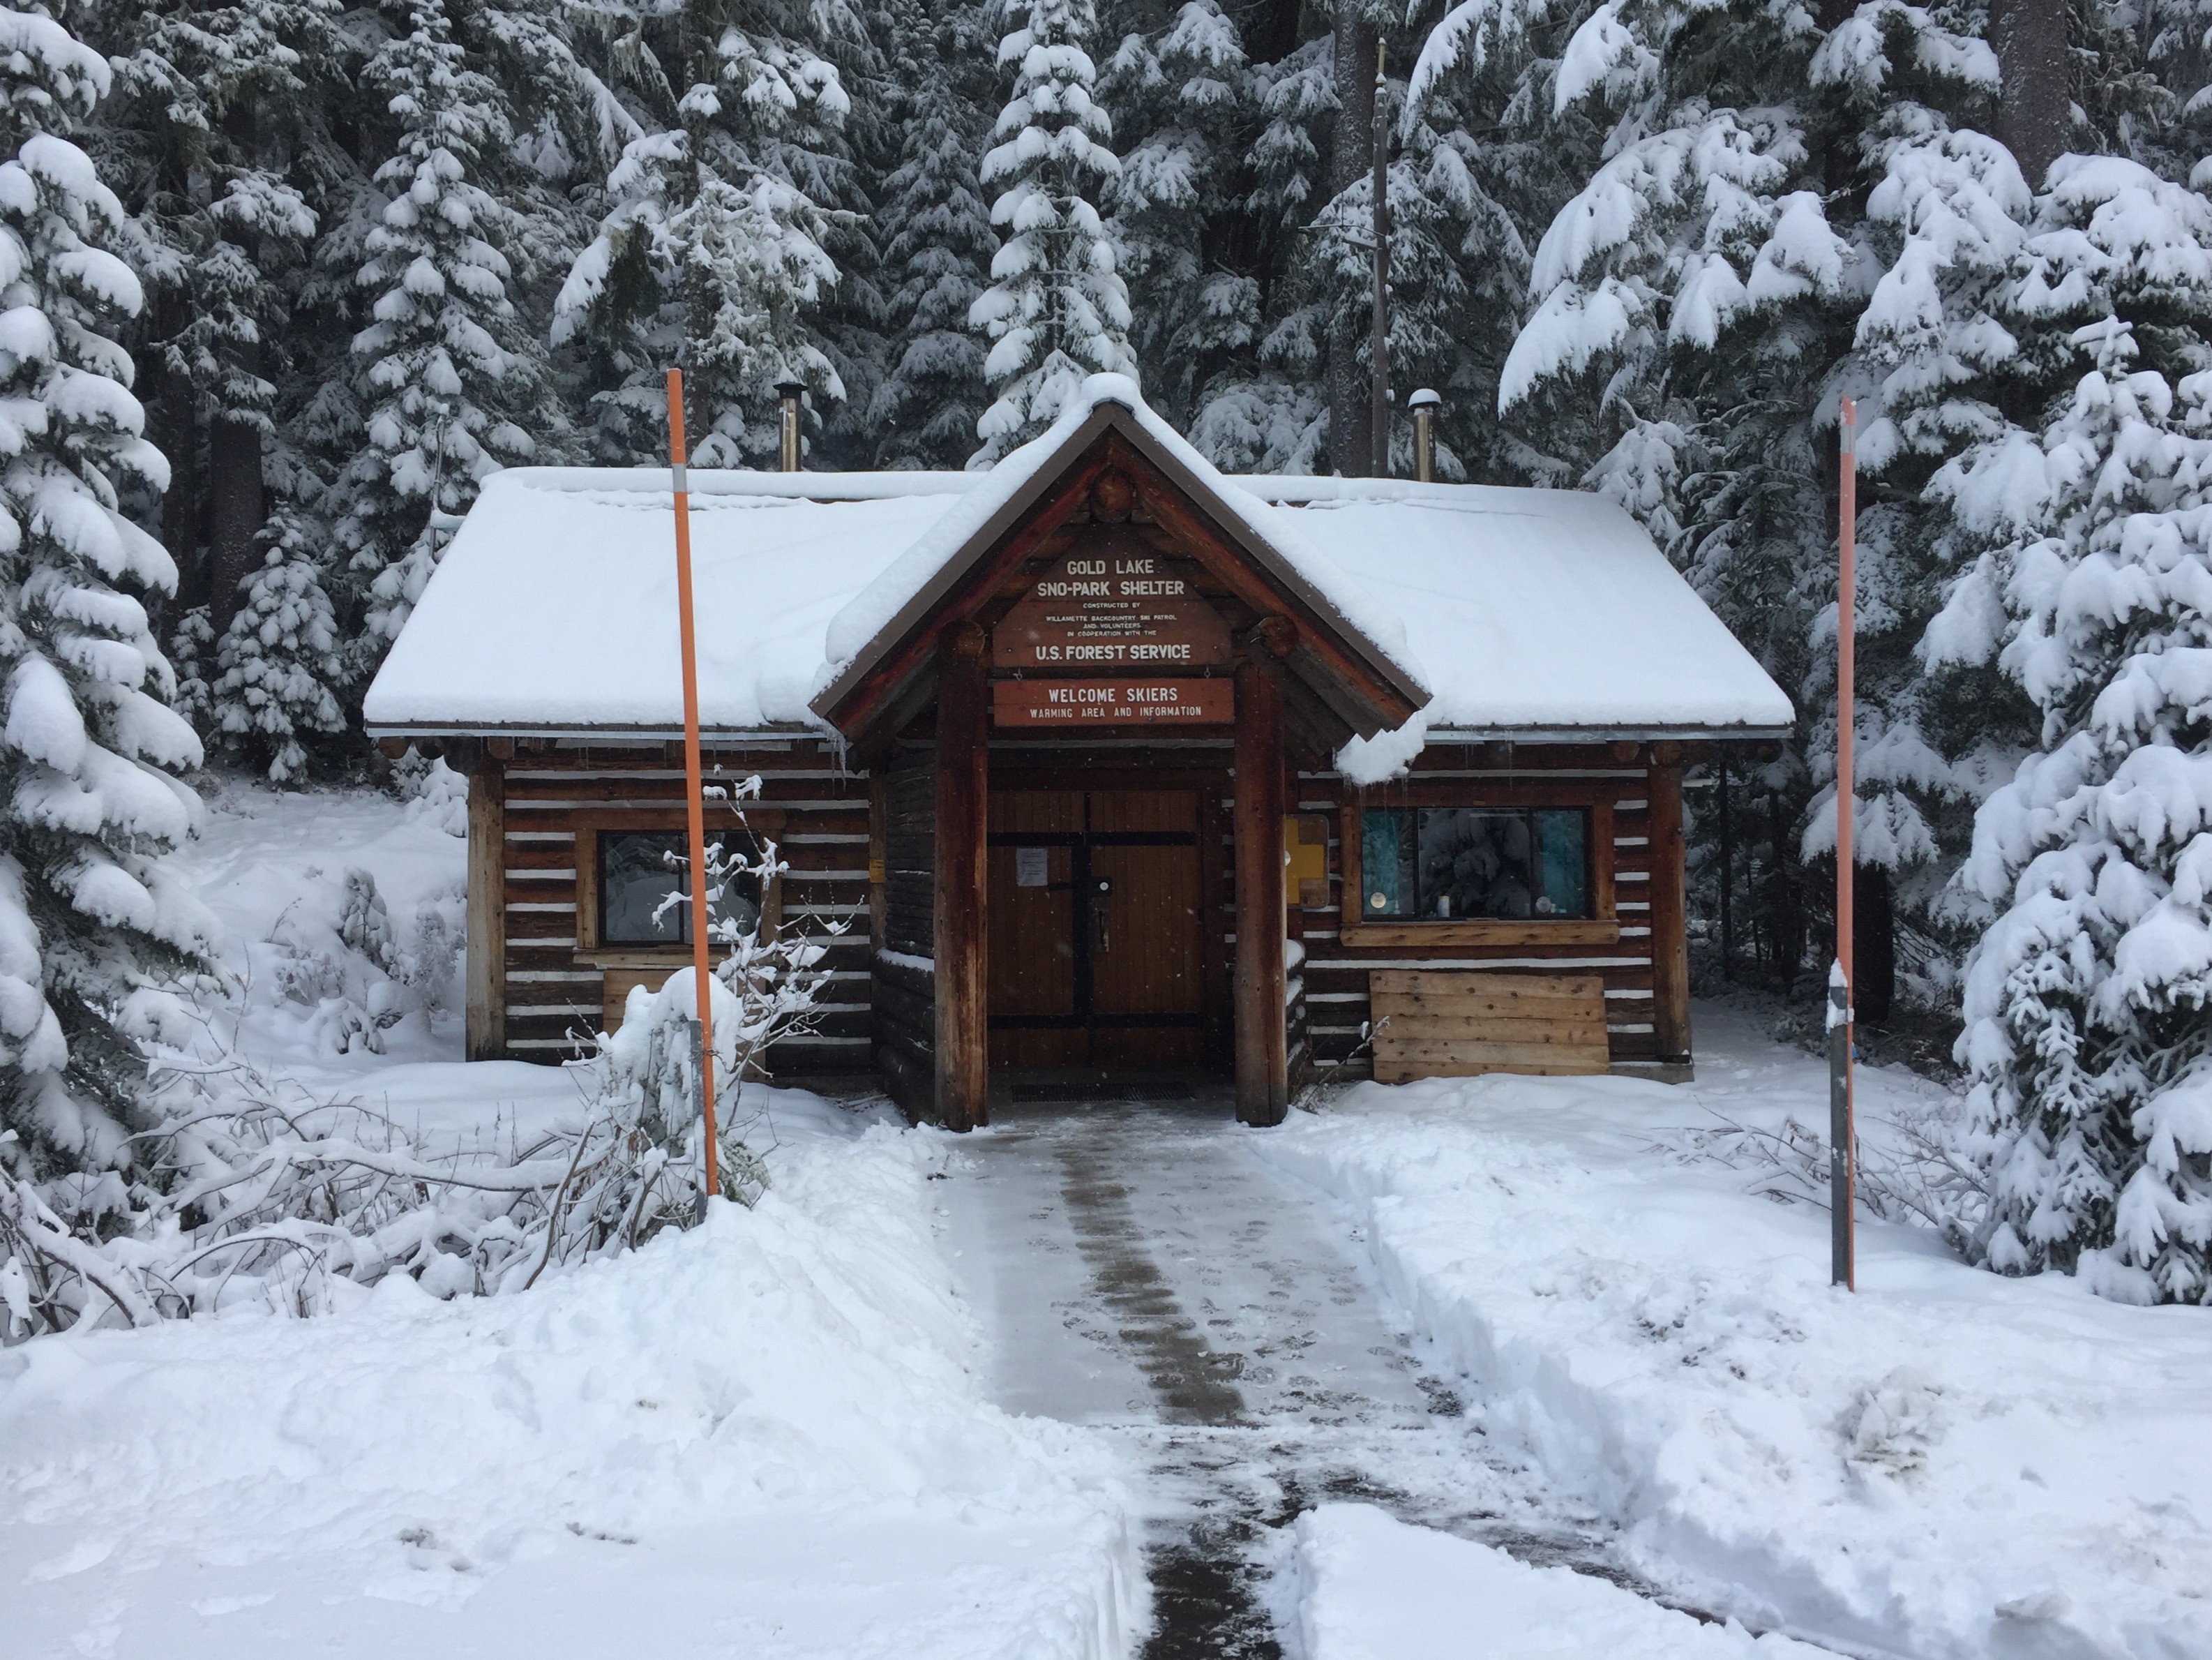 Gold Lake Sno Park Warming Hut / Backcountry Patrol Cabin in early winter with snow